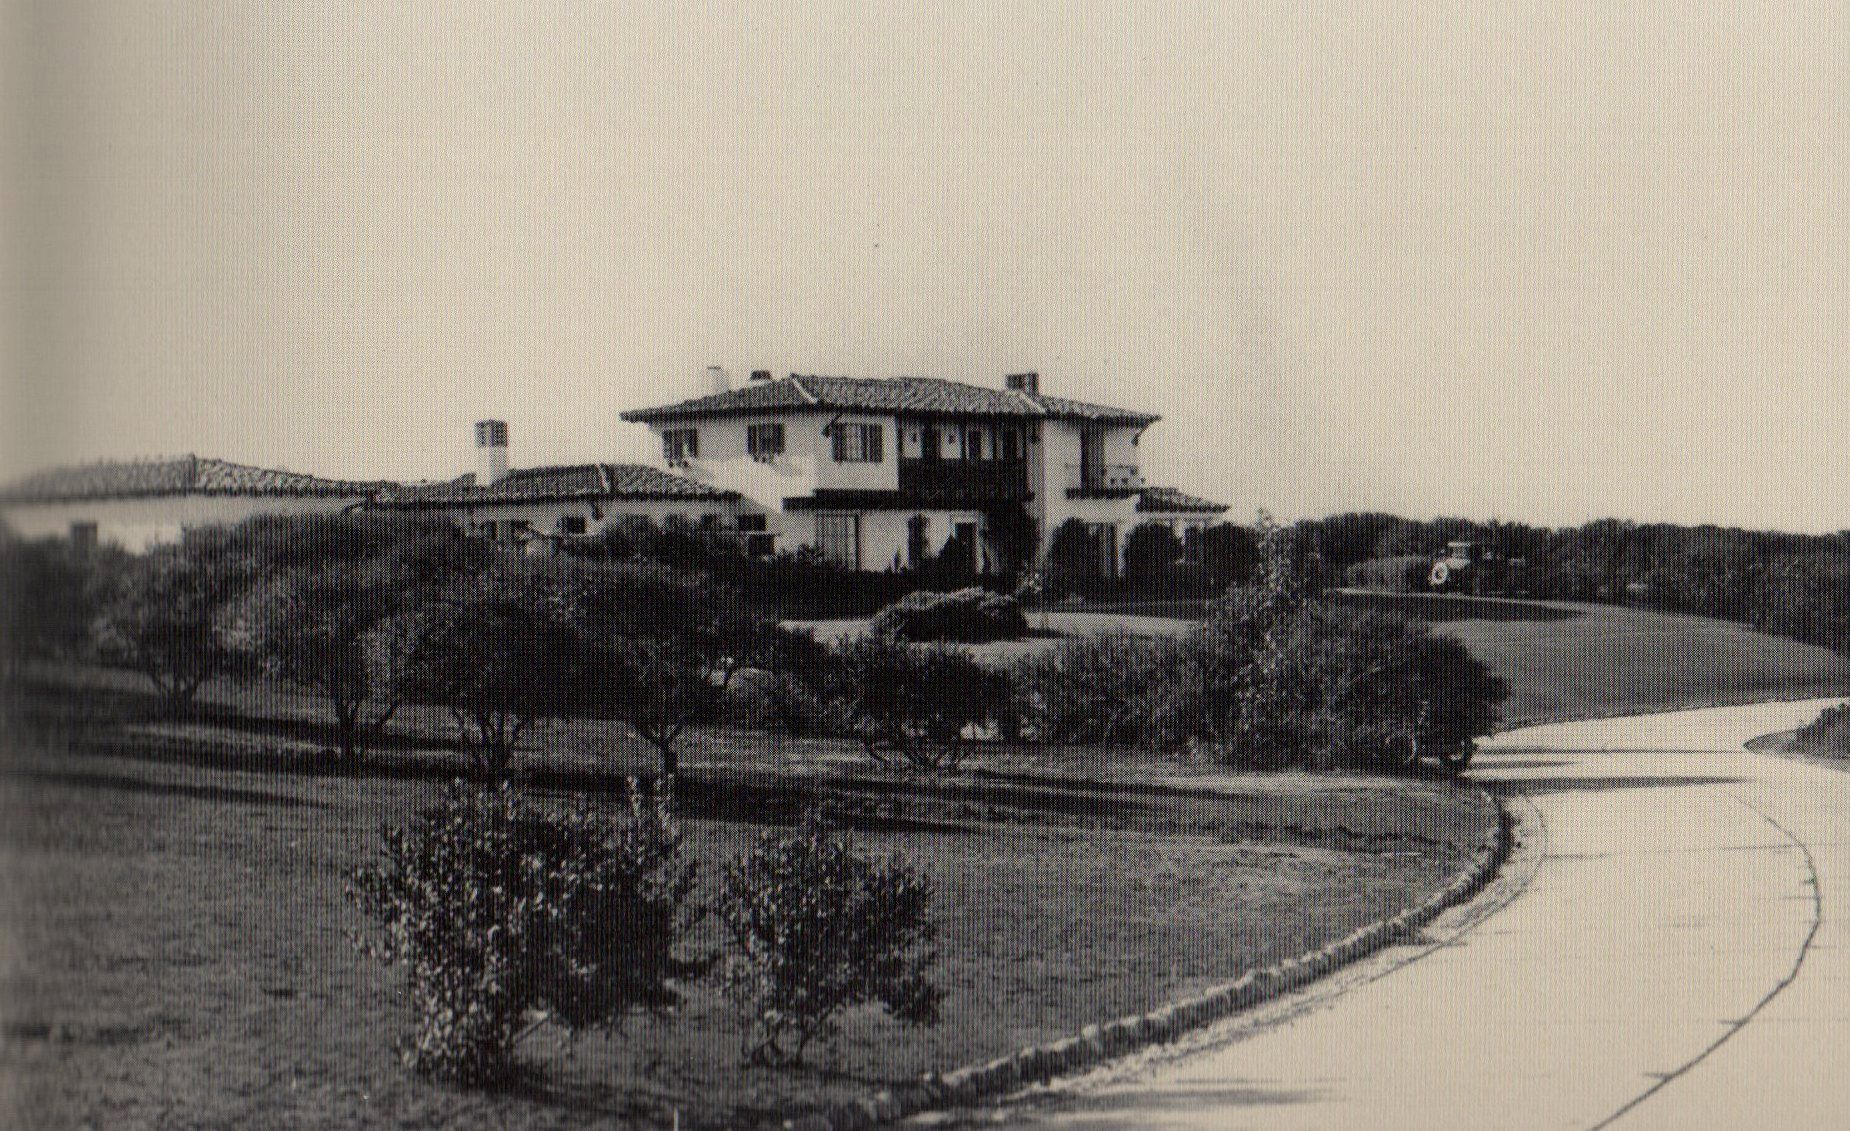 The Muir Home courtesty of the La Jolla Historical Society